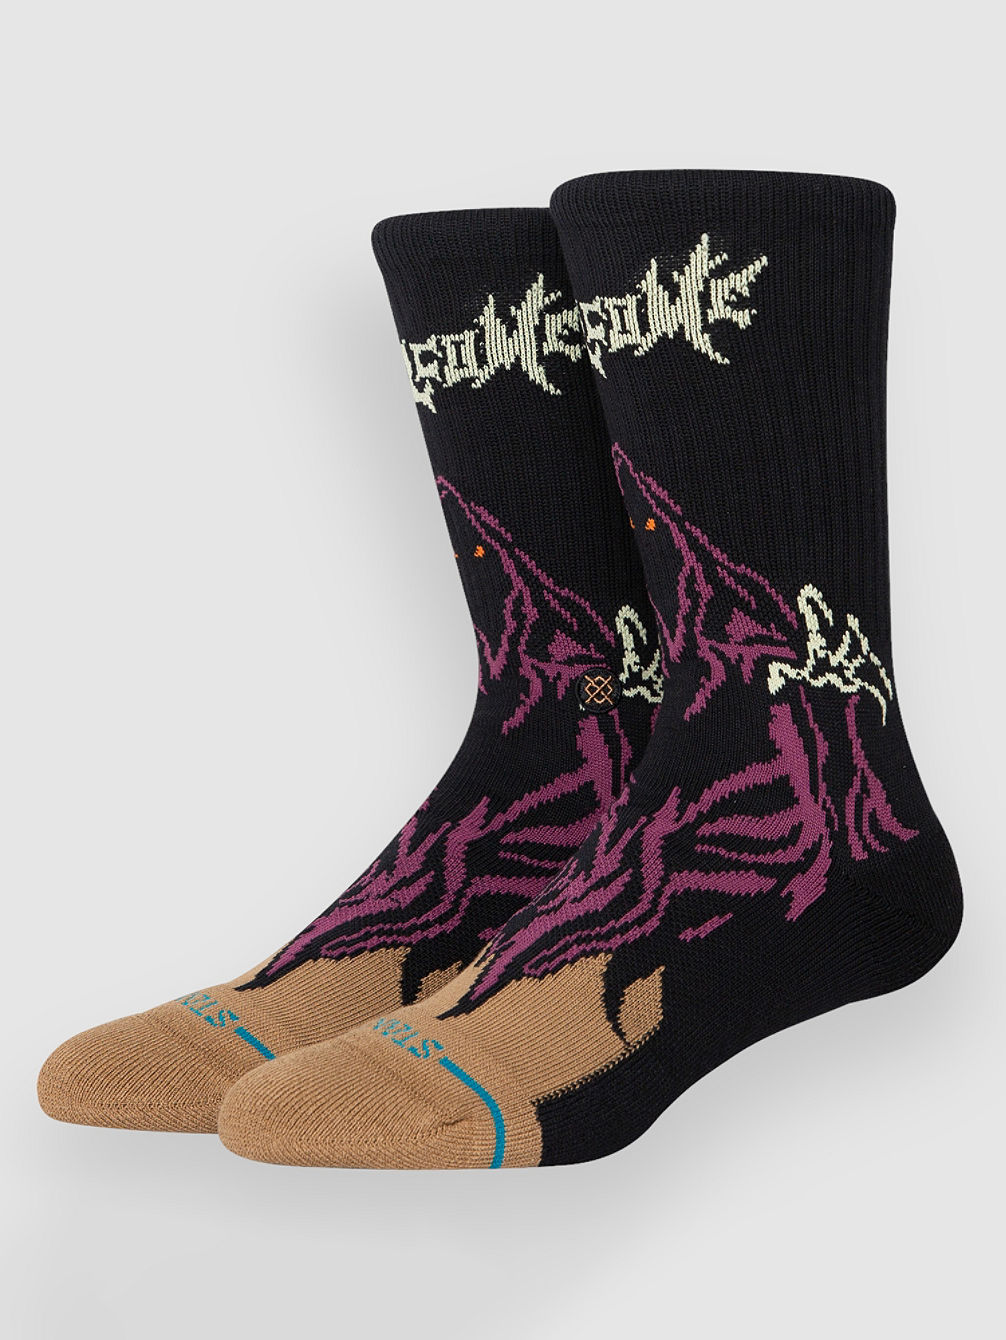 Welcome Skelly Crew Socks